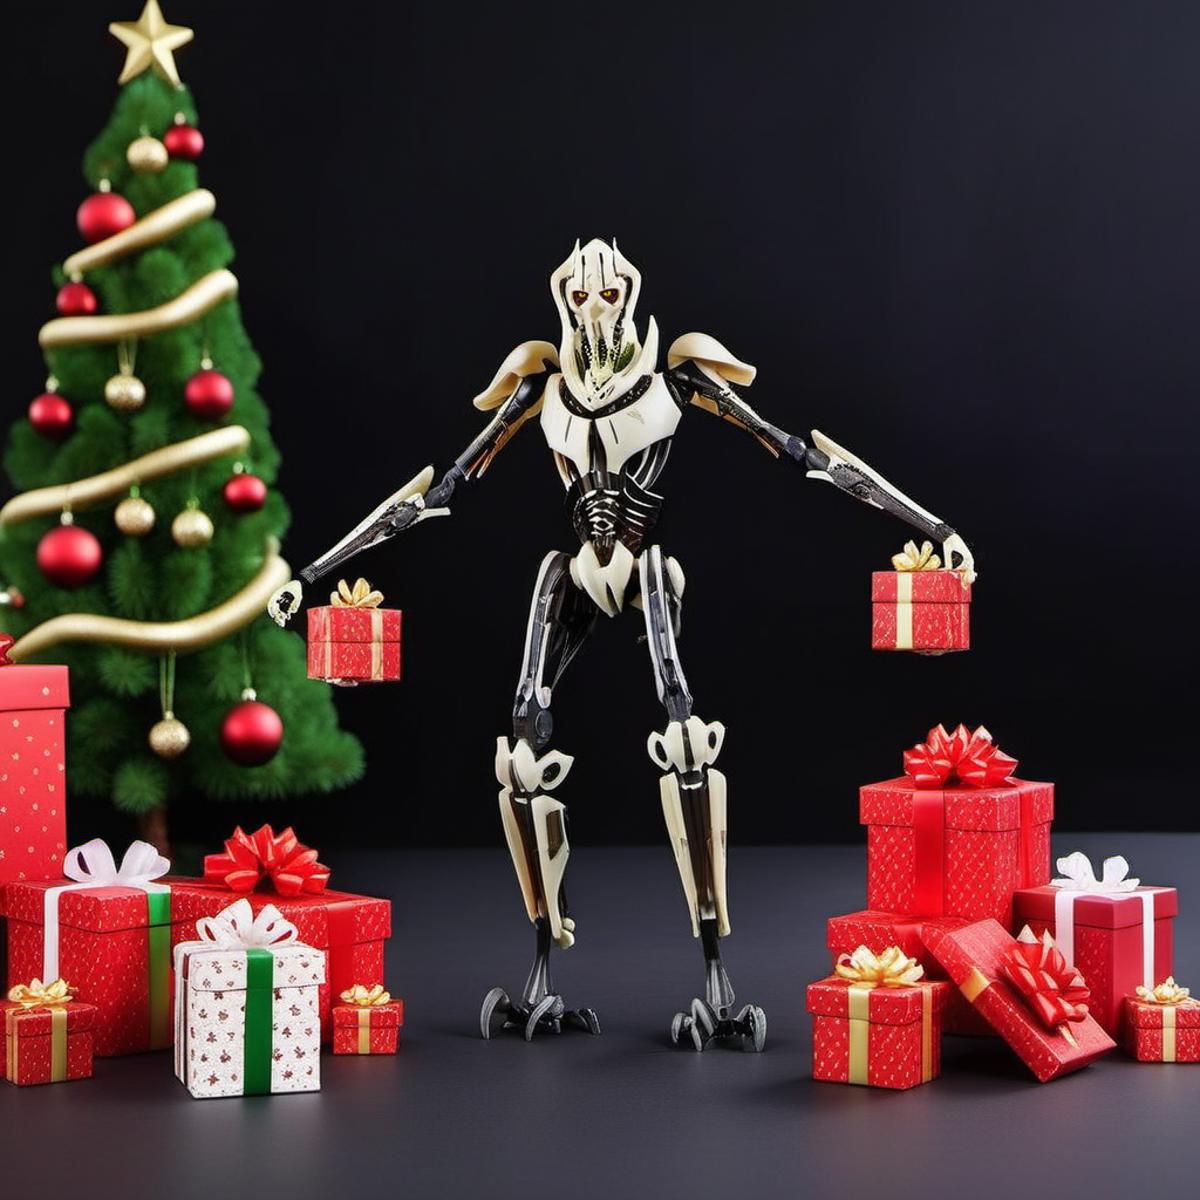 General Grievous - Star Wars - SDXL image by PhotobAIt